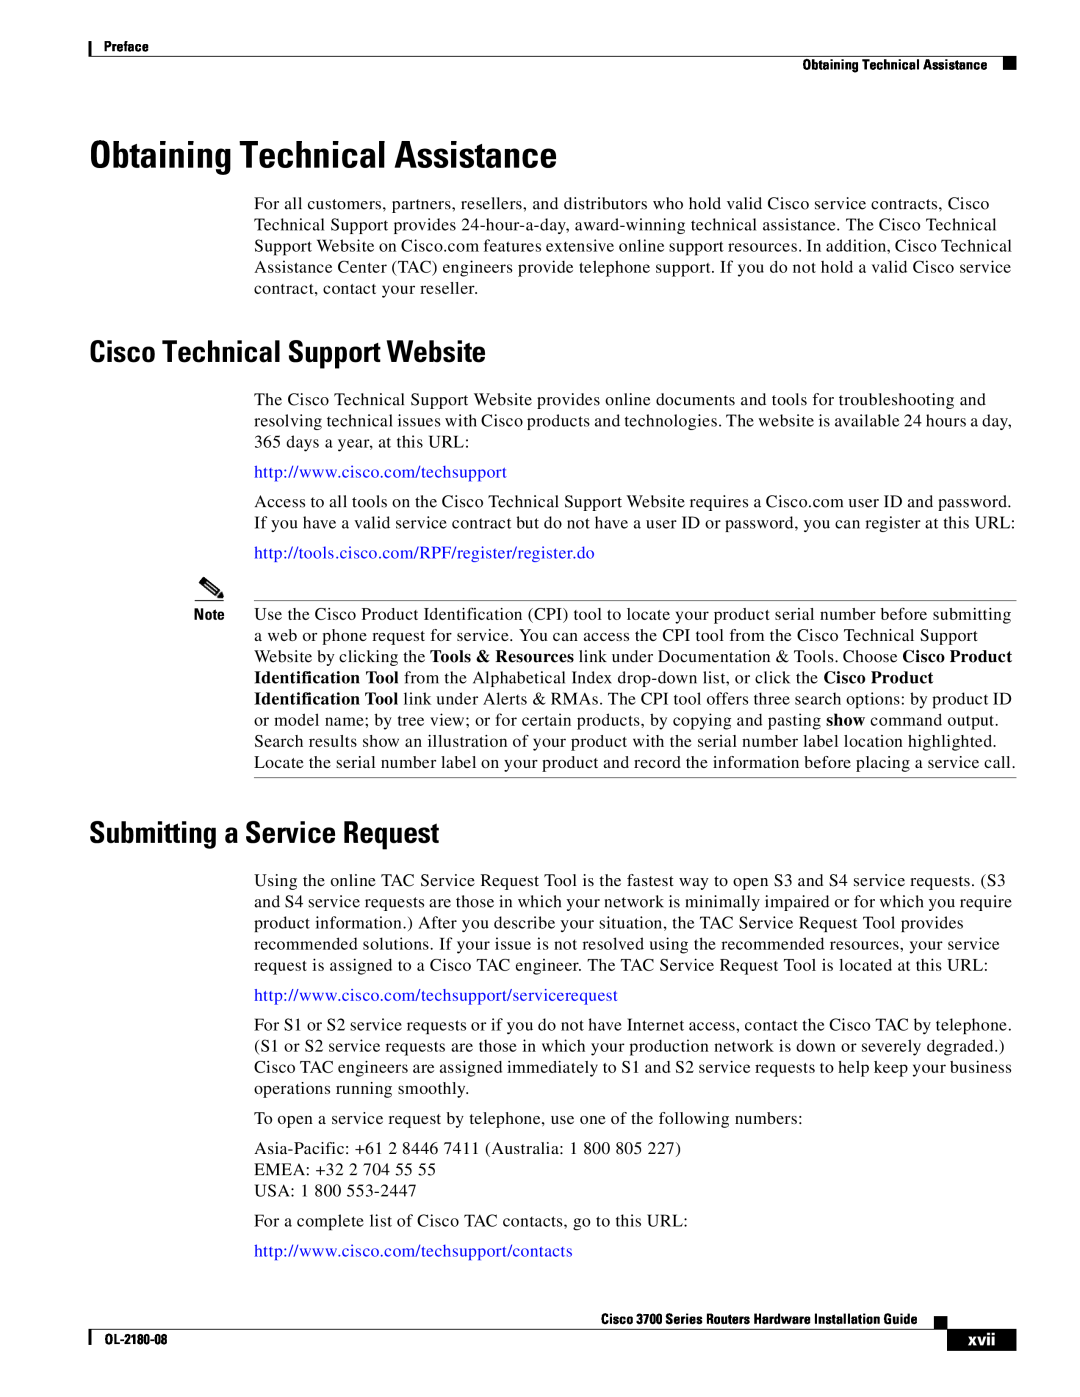 Cisco Systems 3700 Series Obtaining Technical Assistance, Cisco Technical Support Website, Submitting a Service Request 